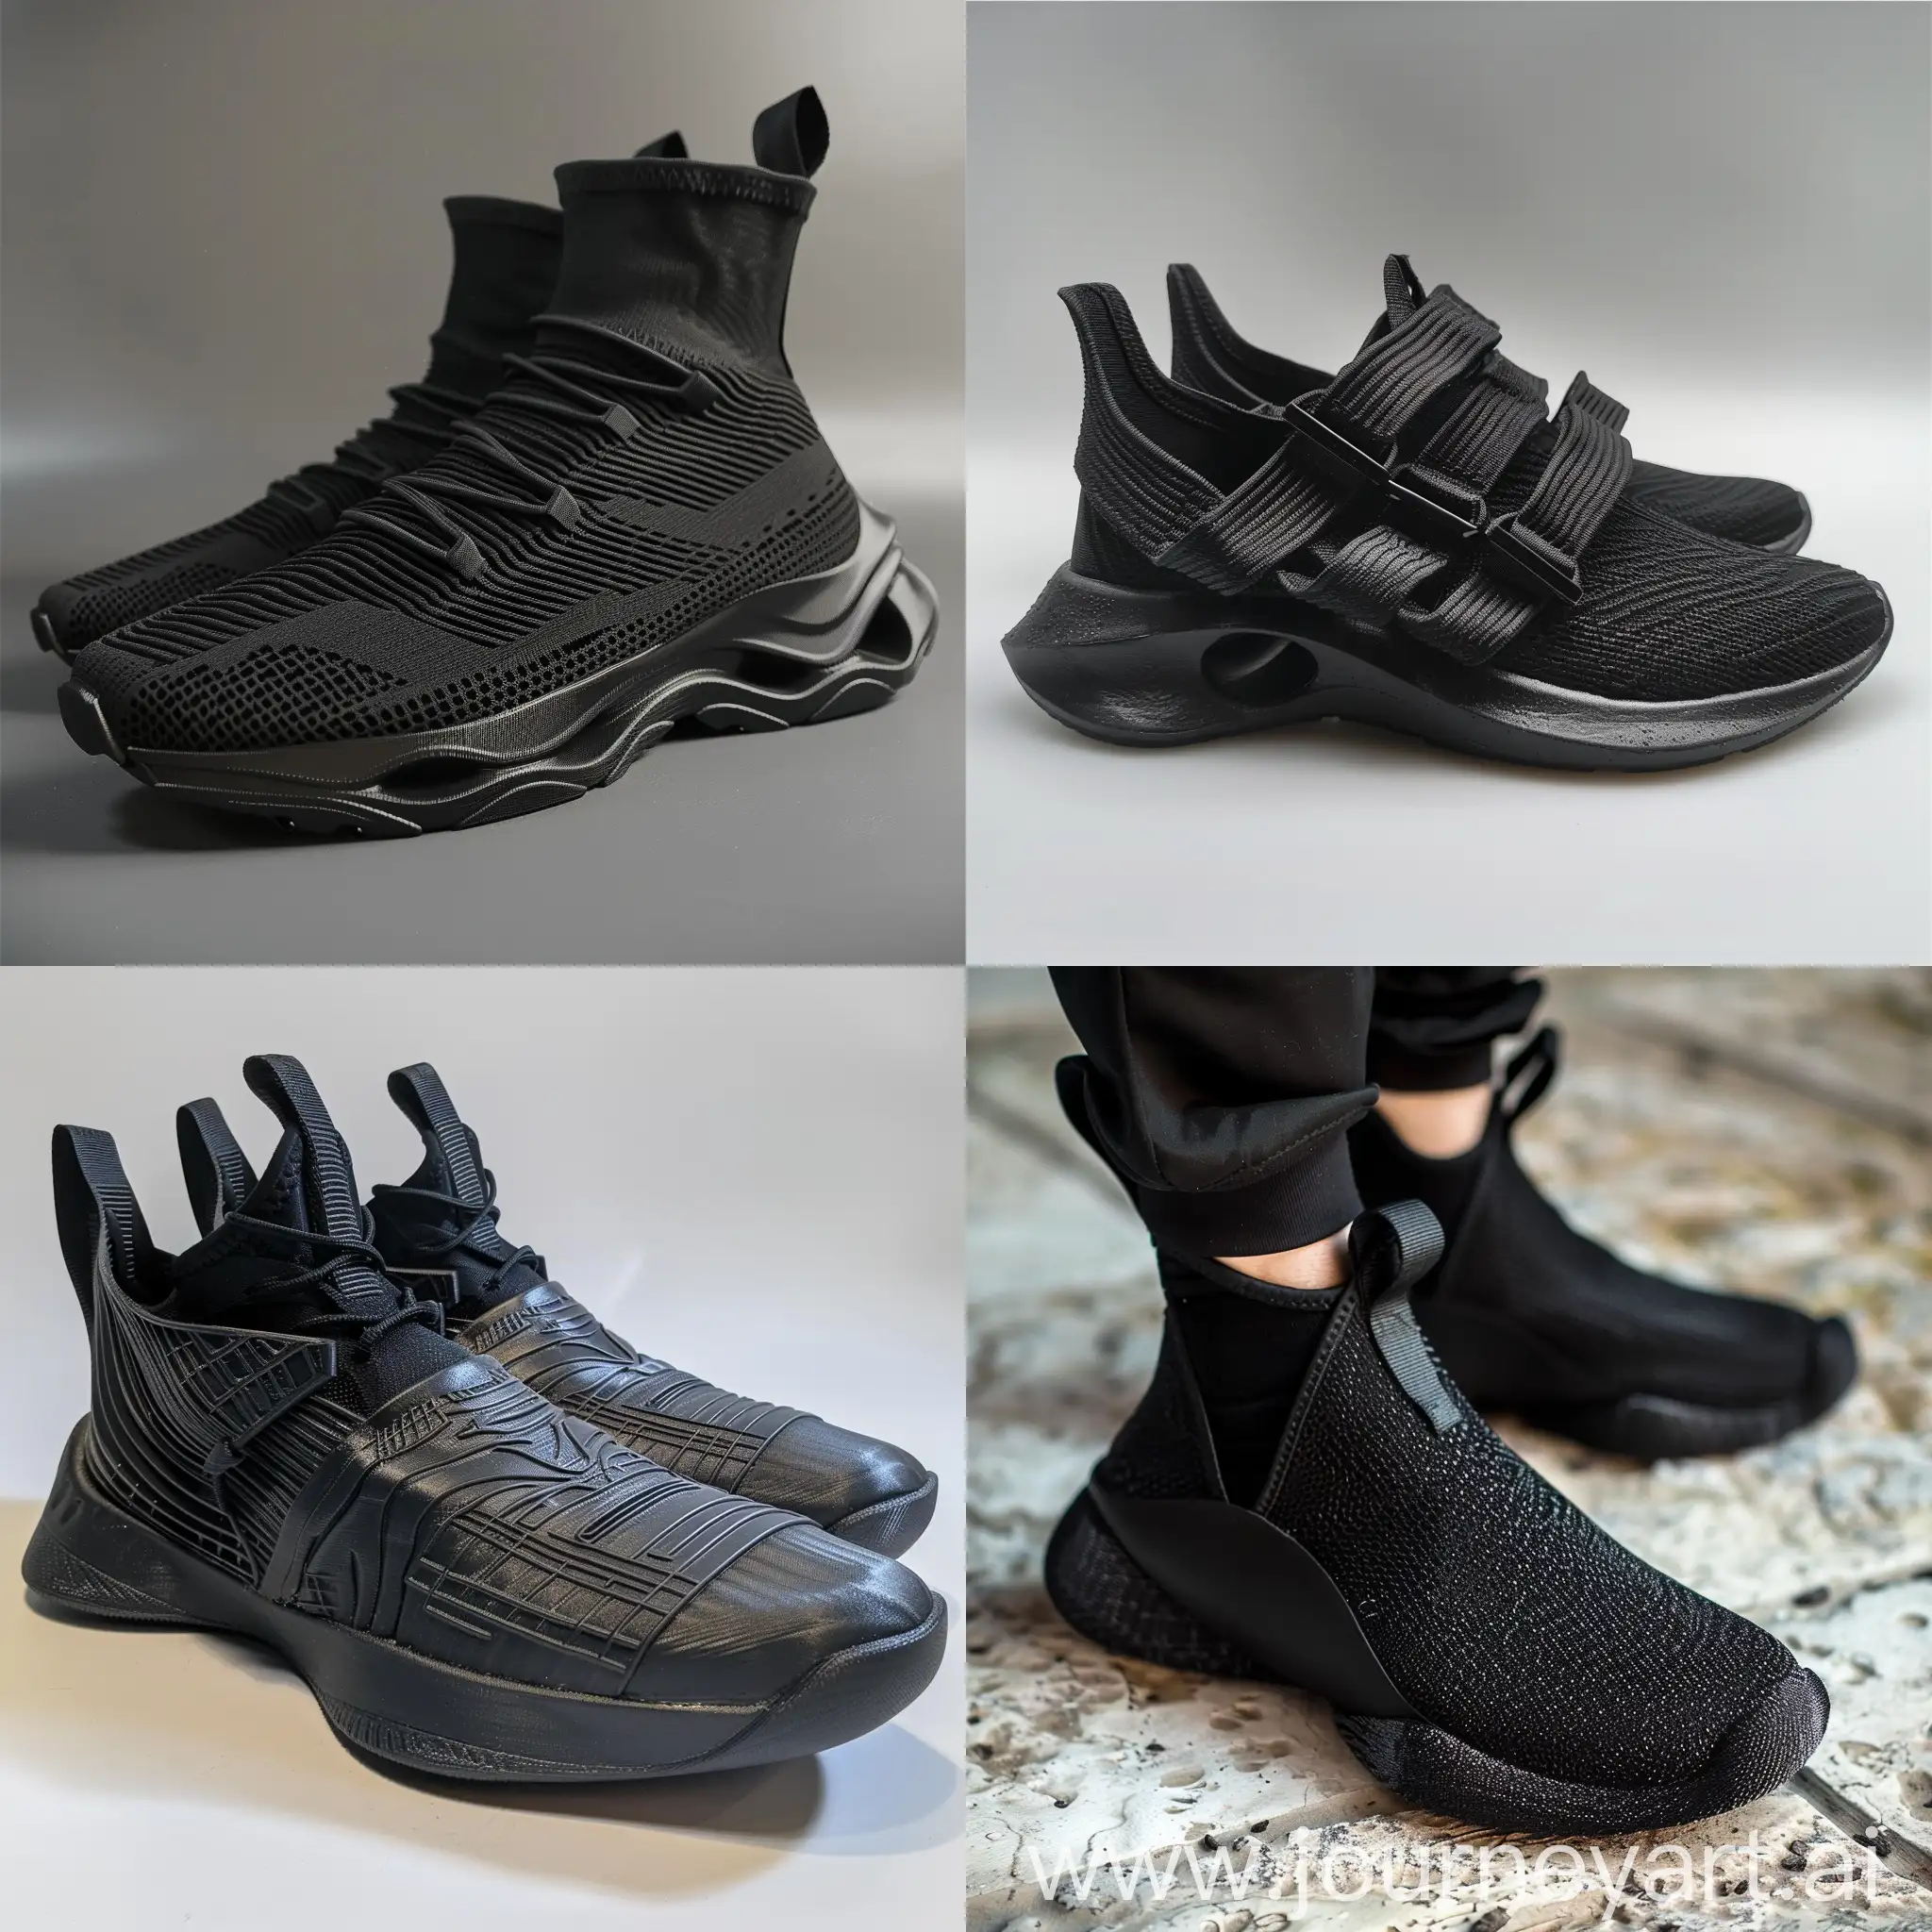 Design sneakers , no laces , ancient Egypt inspiration , 3d printed , color black  , can add intire socks to it , futuristic design , breathable 